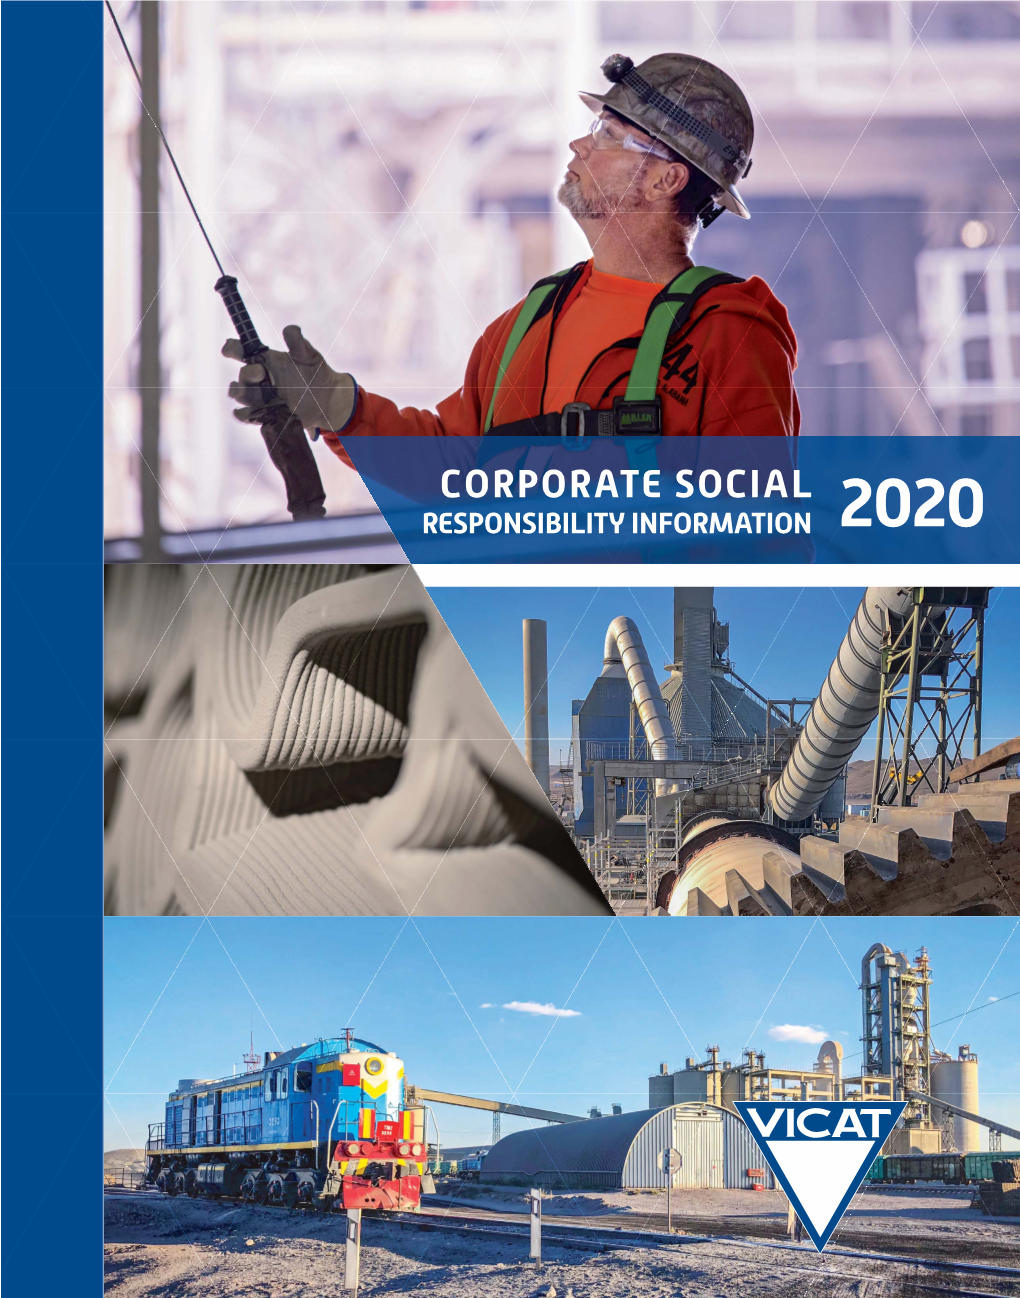 CORPORATE SOCIAL RESPONSIBILITY INFORMATION 2020 National Cement Employee , Alabama (USA)